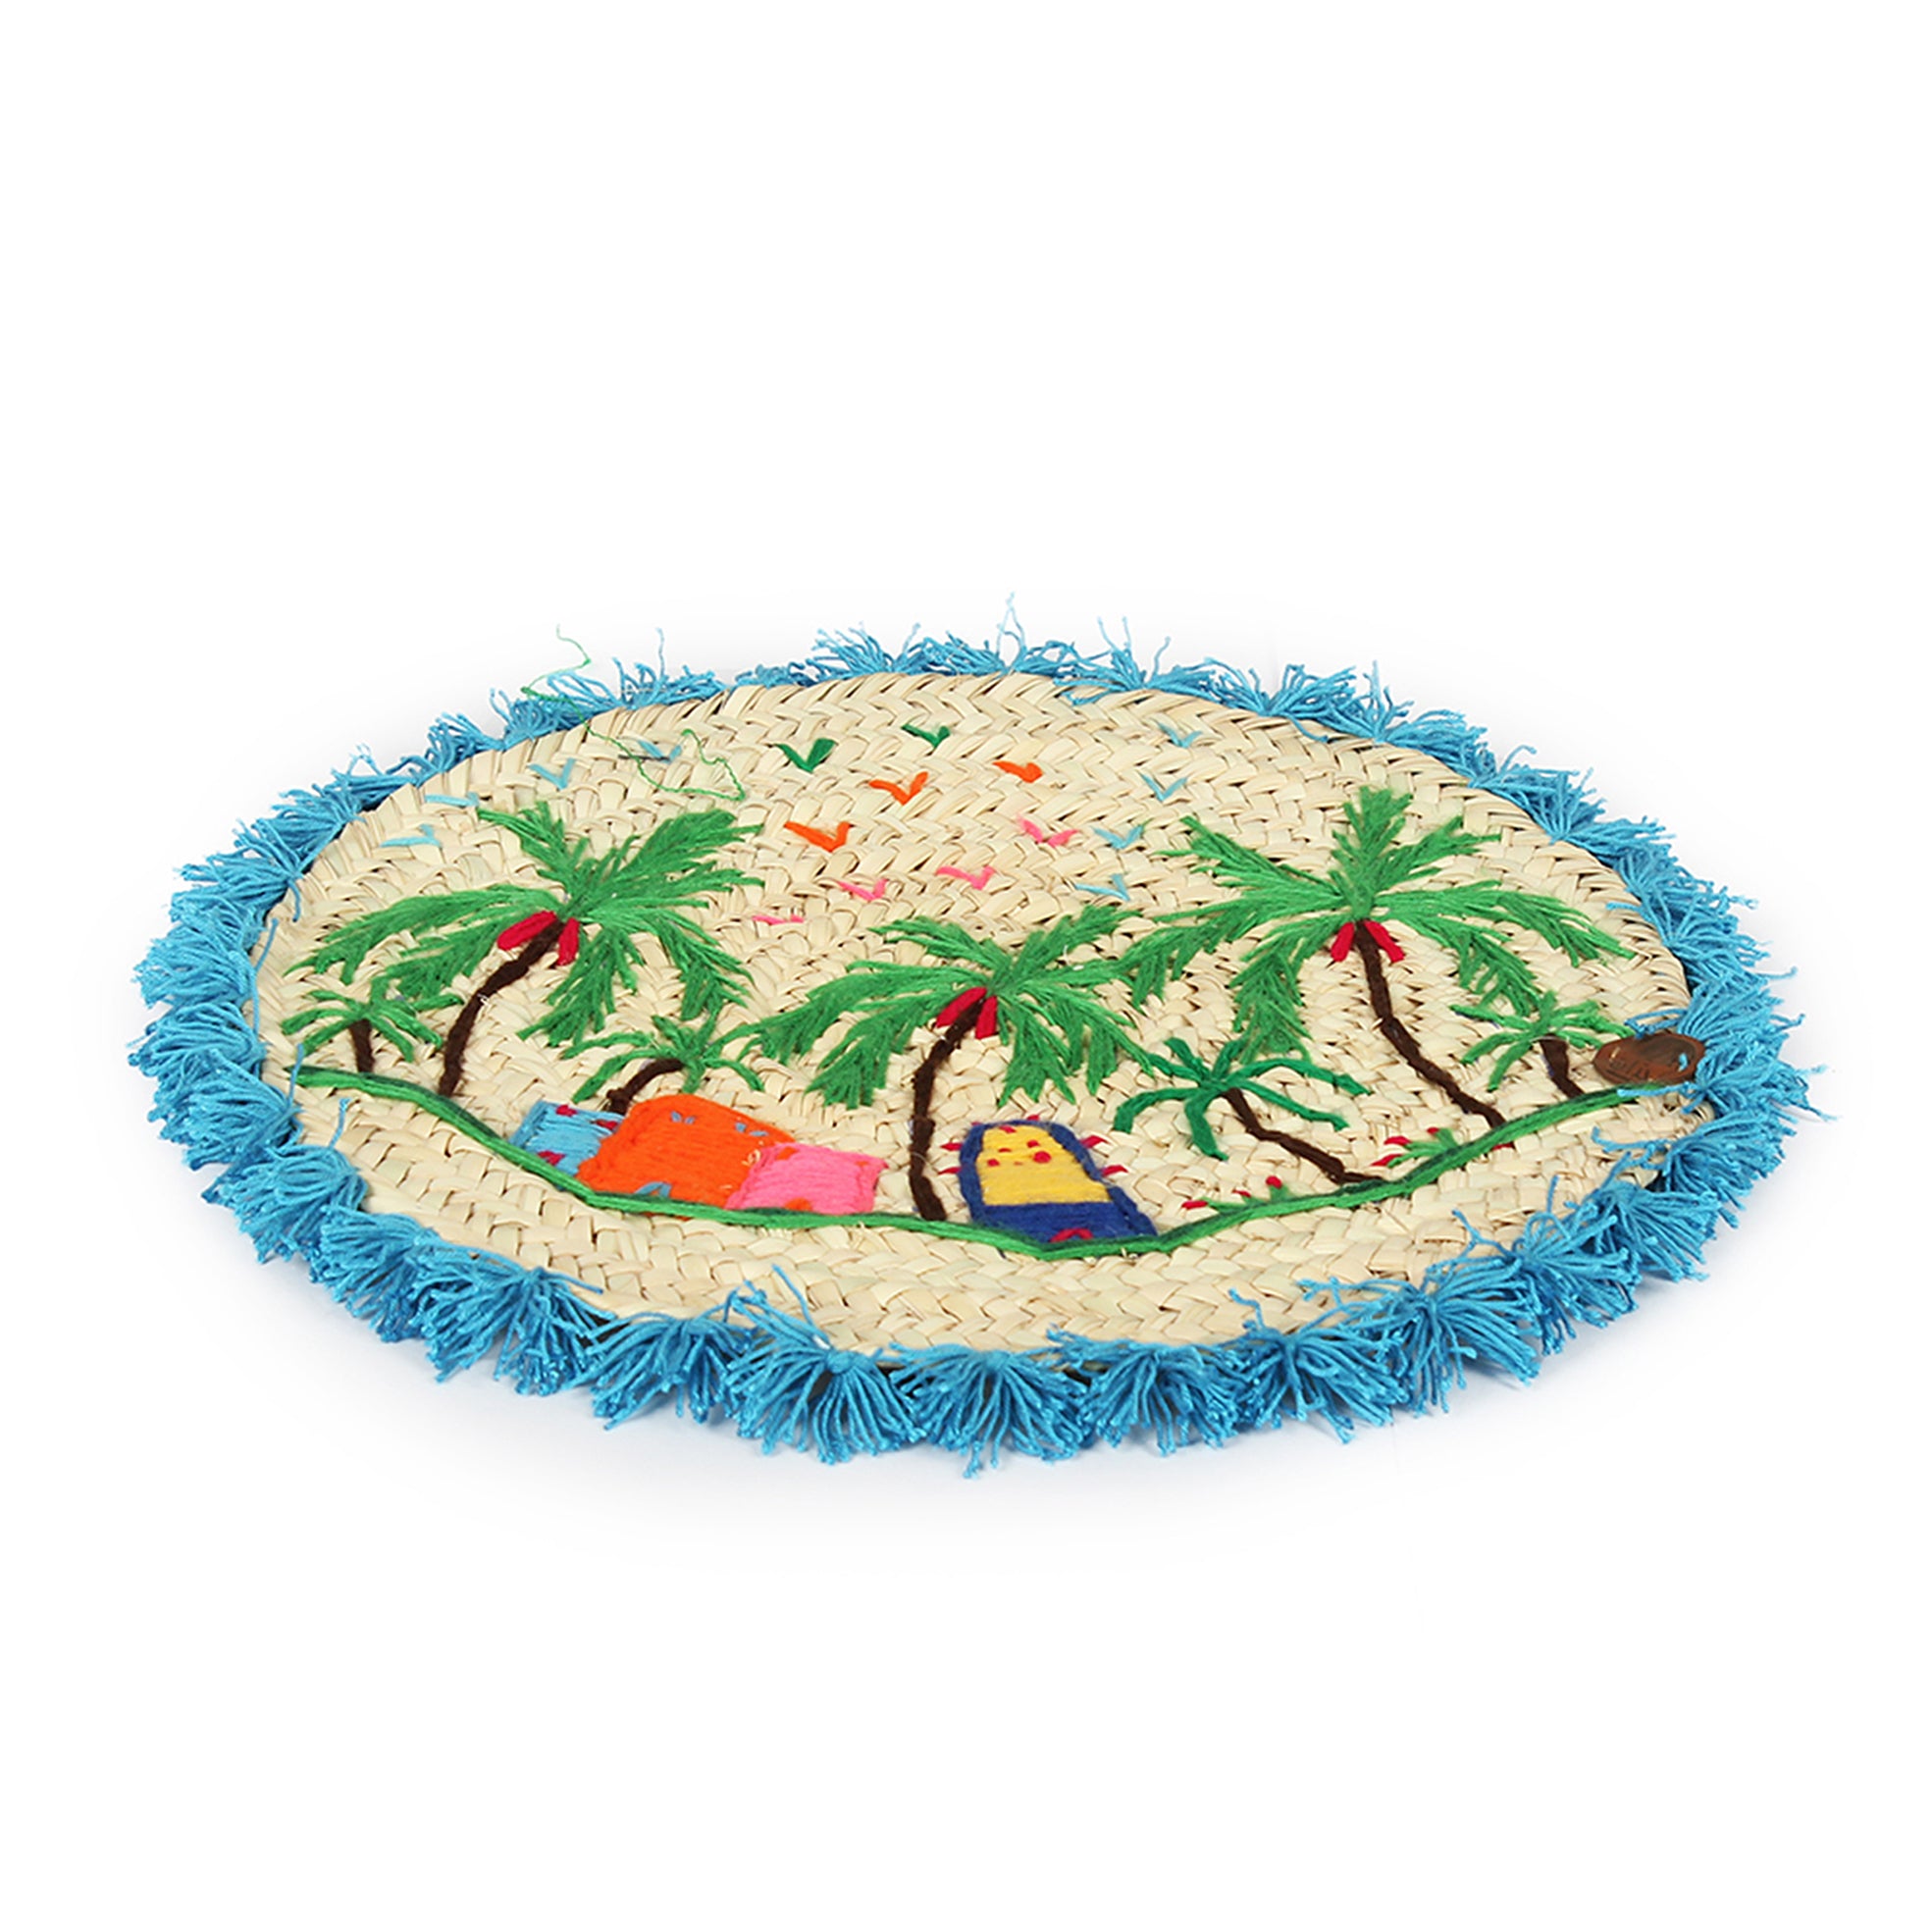 Embroidered Khoos Placemats